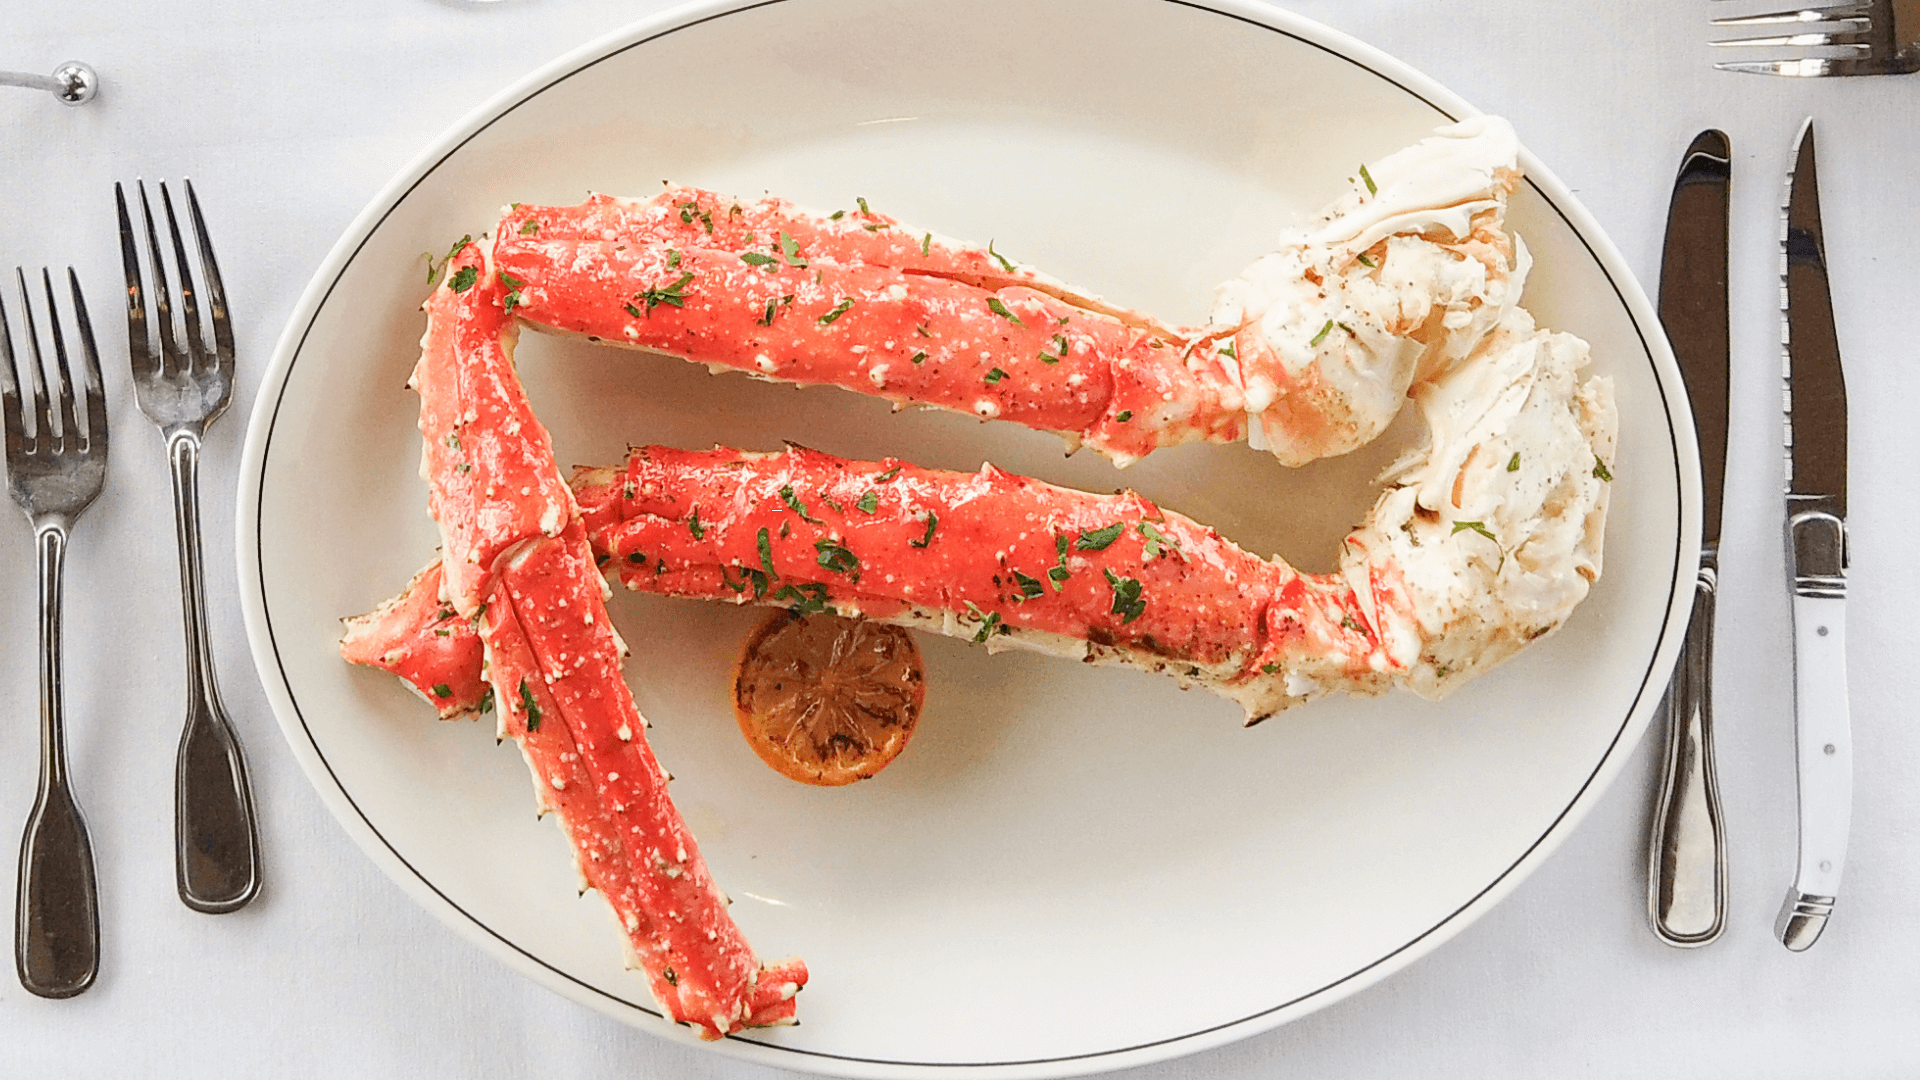 picture of Alaskan king crab legs on a plate with a lemon wheel and silverware